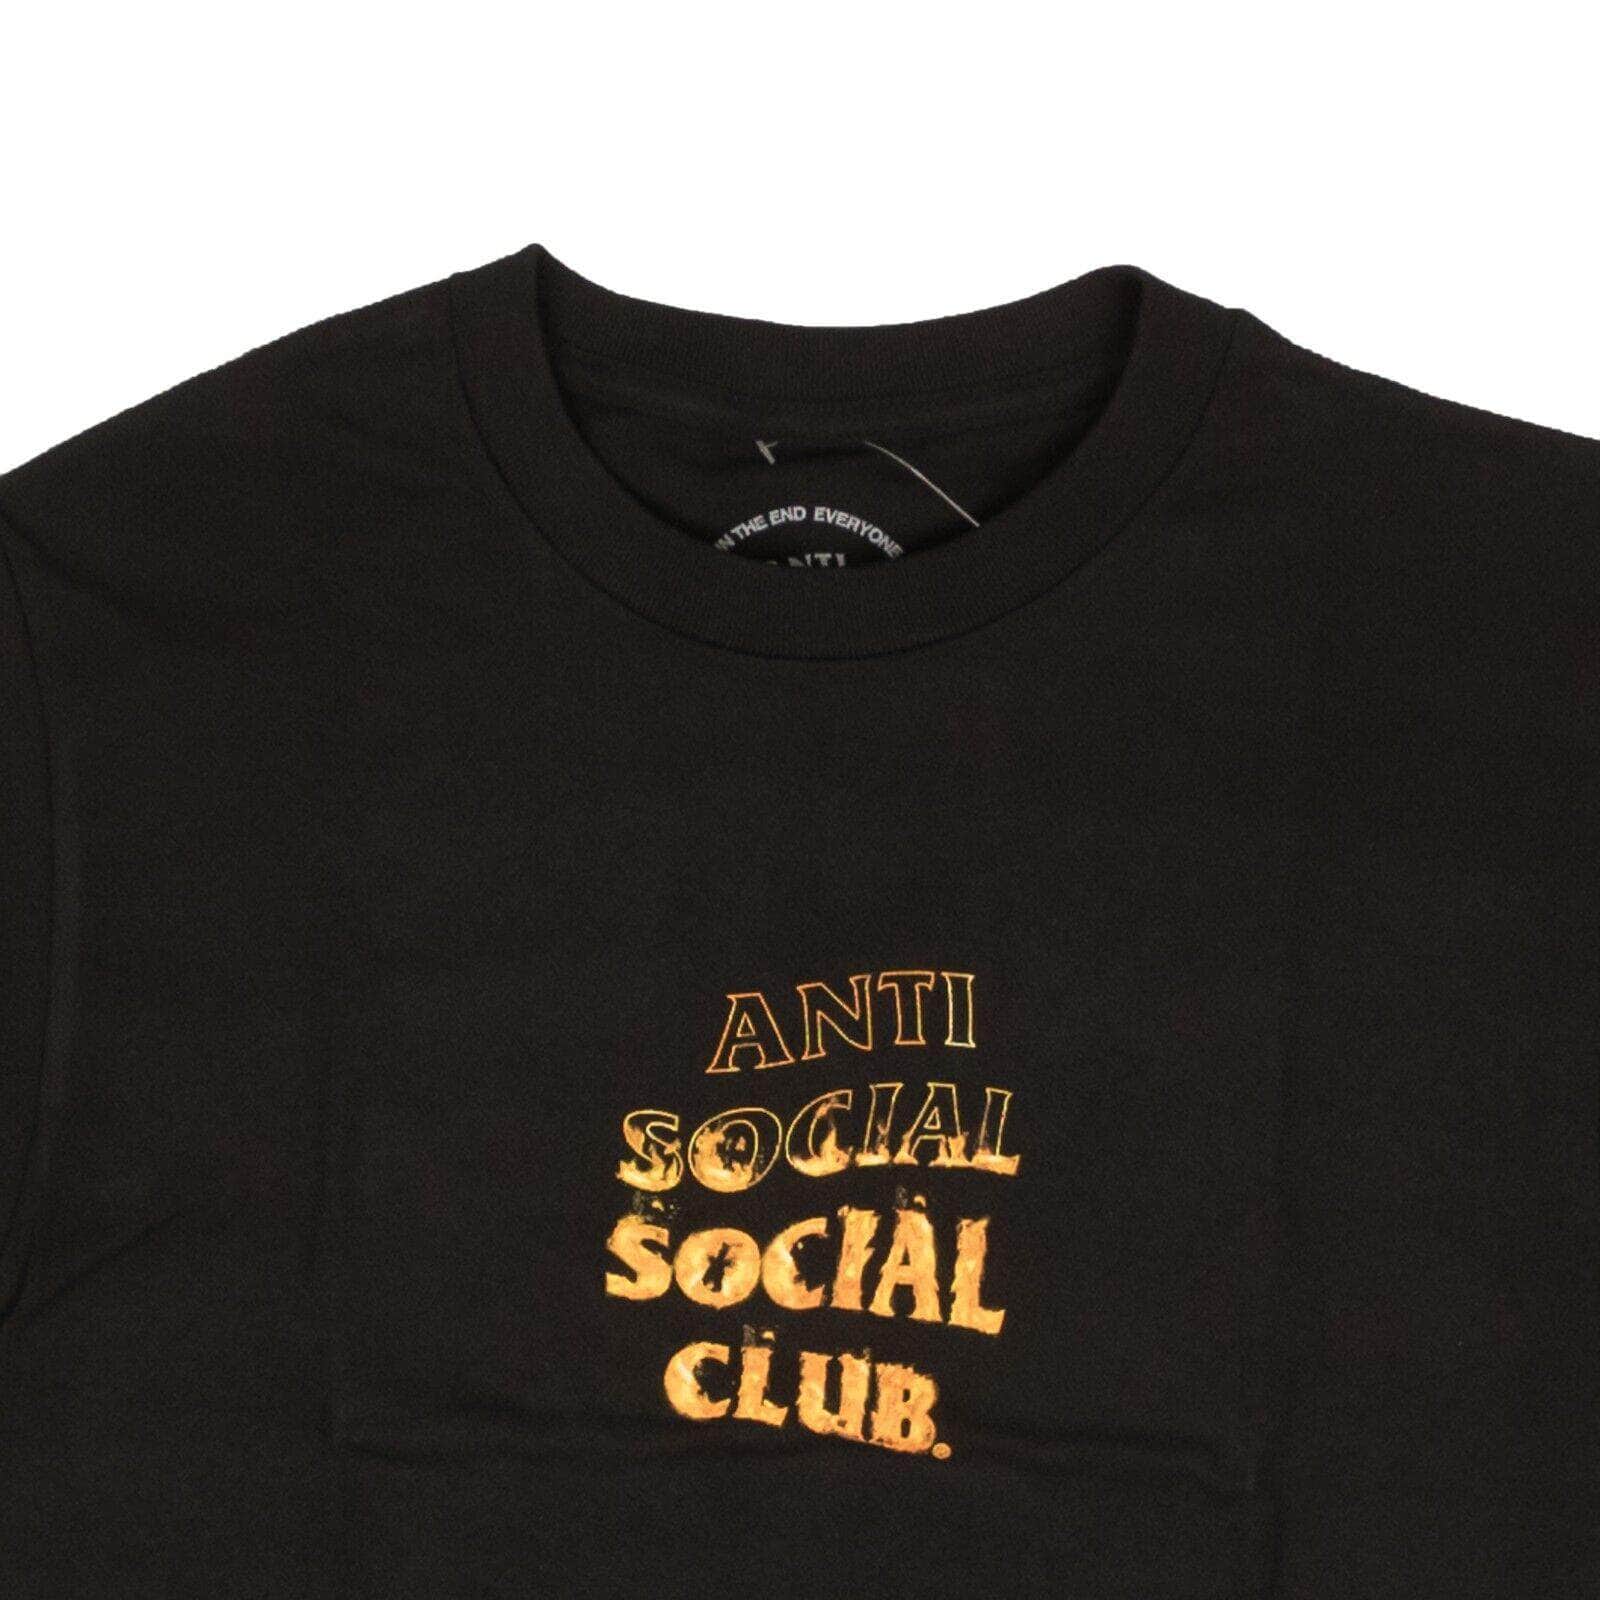 Anti Social Social Club anti-social-social-club, channelenable-all, chicmi, couponcollection, gender-mens, main-clothing, mens-shoes, size-l, size-m, size-s, size-xl, under-250 Black A Fire Inside Short Sleeve T-Shirt